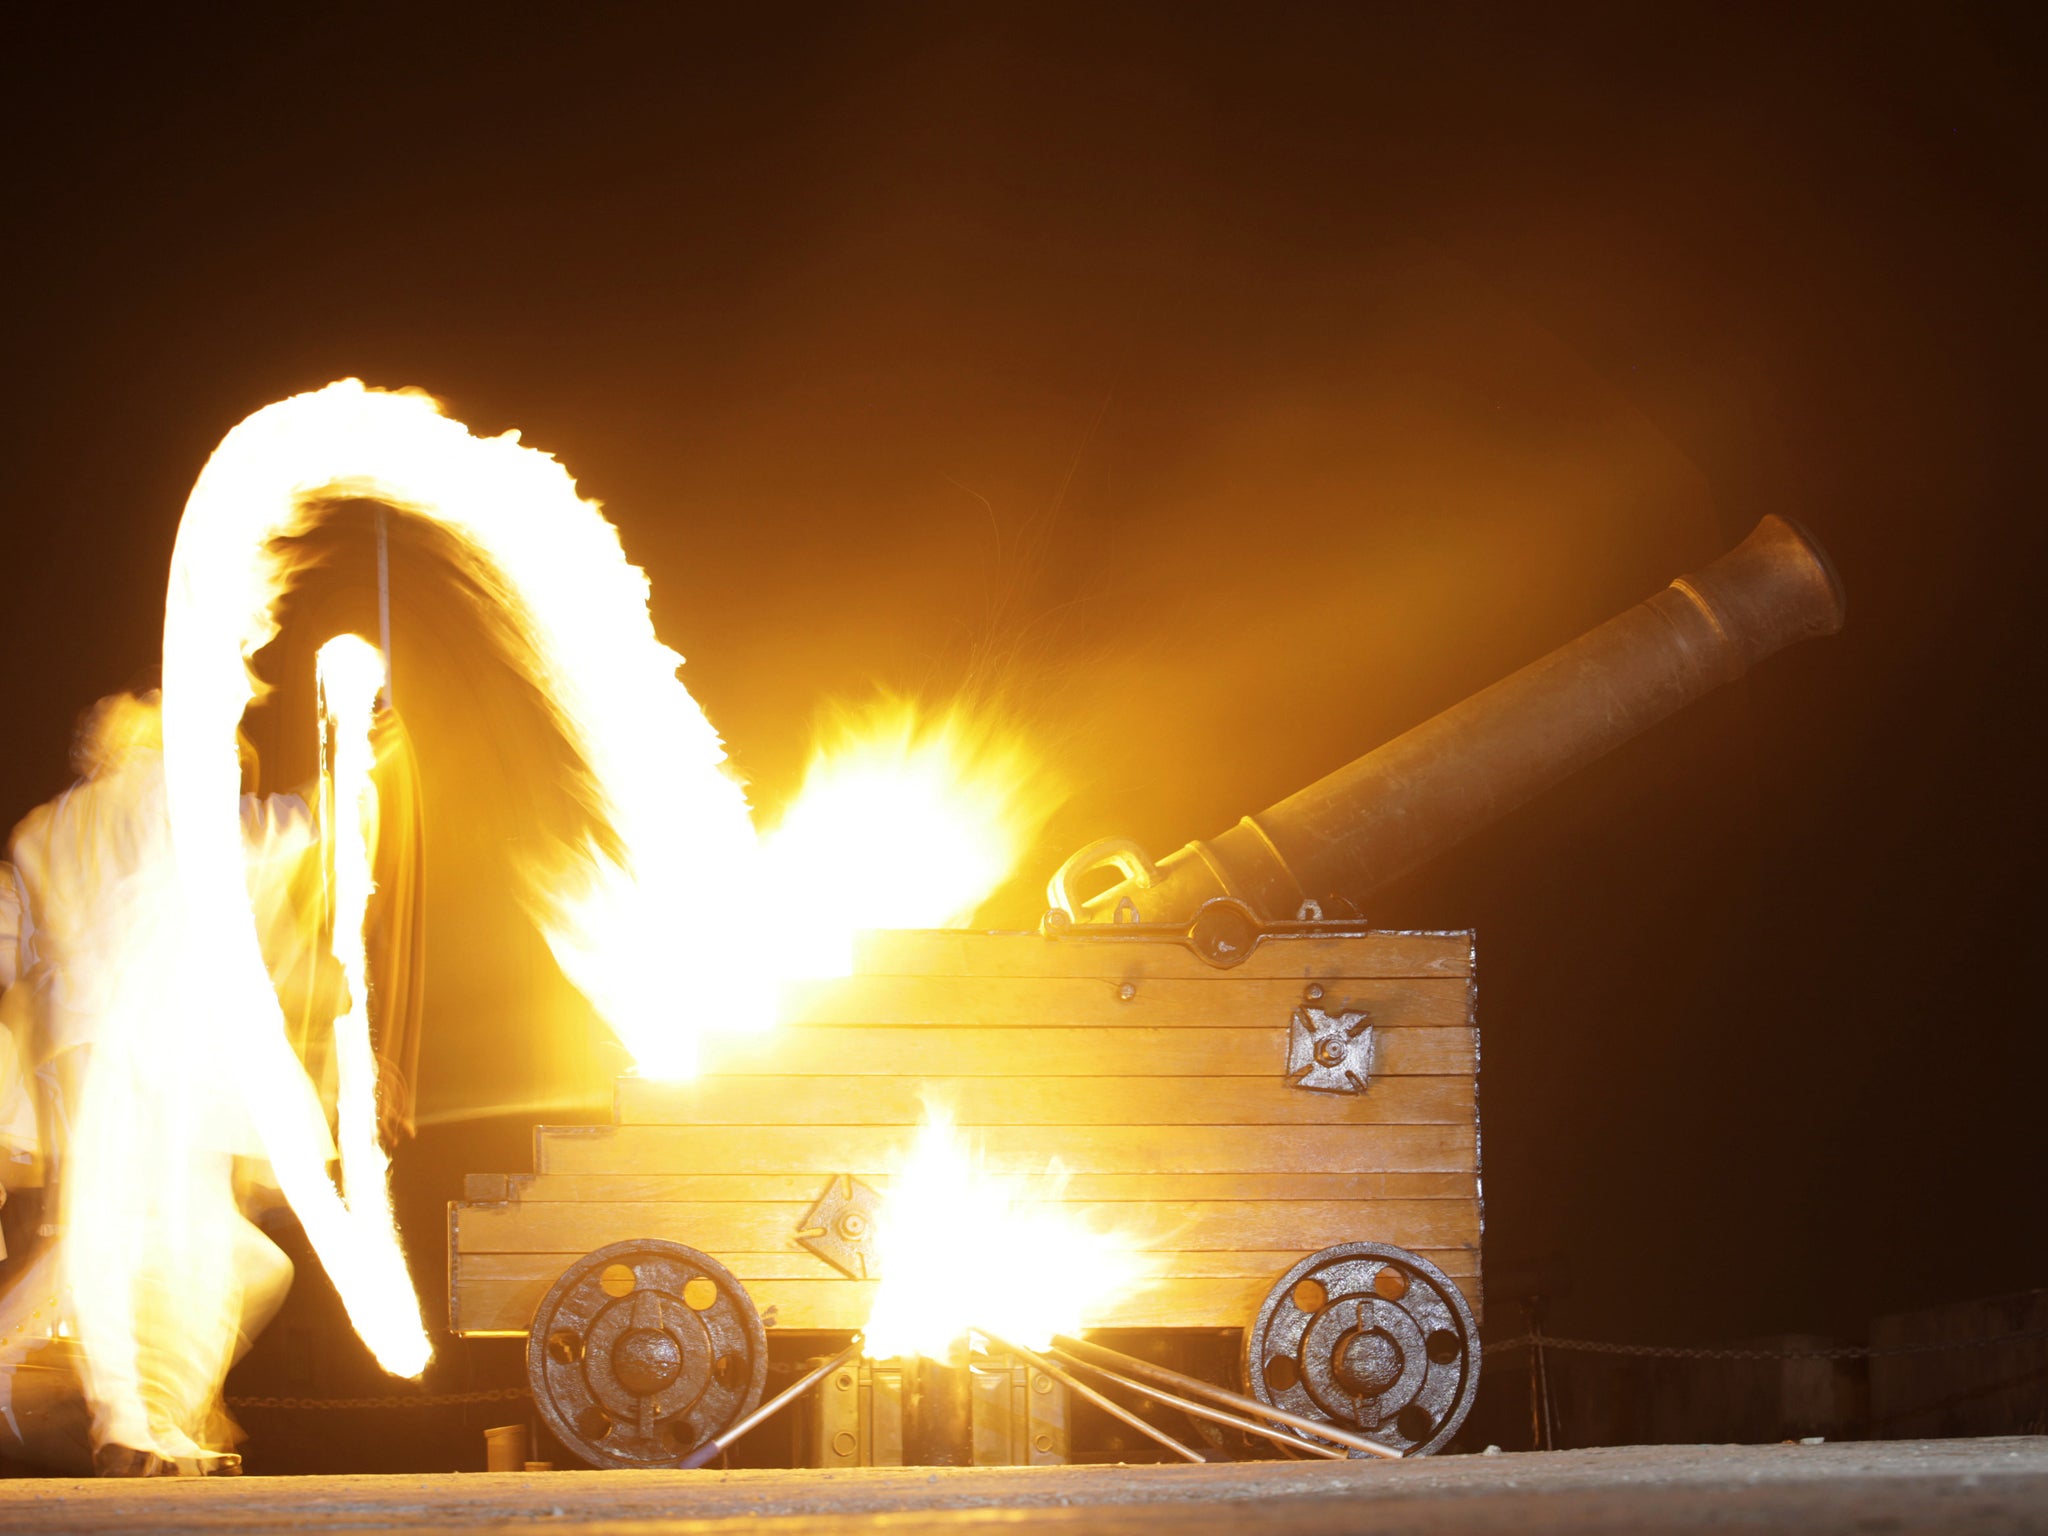 An army recruit dressed in an 18th century costume lights the fuse to fire a blank from a cannon during a ceremony known as "The Canonazo" in Havana. The ceremony is carried out every night at 9pm and was originally used to signal to the people that the g